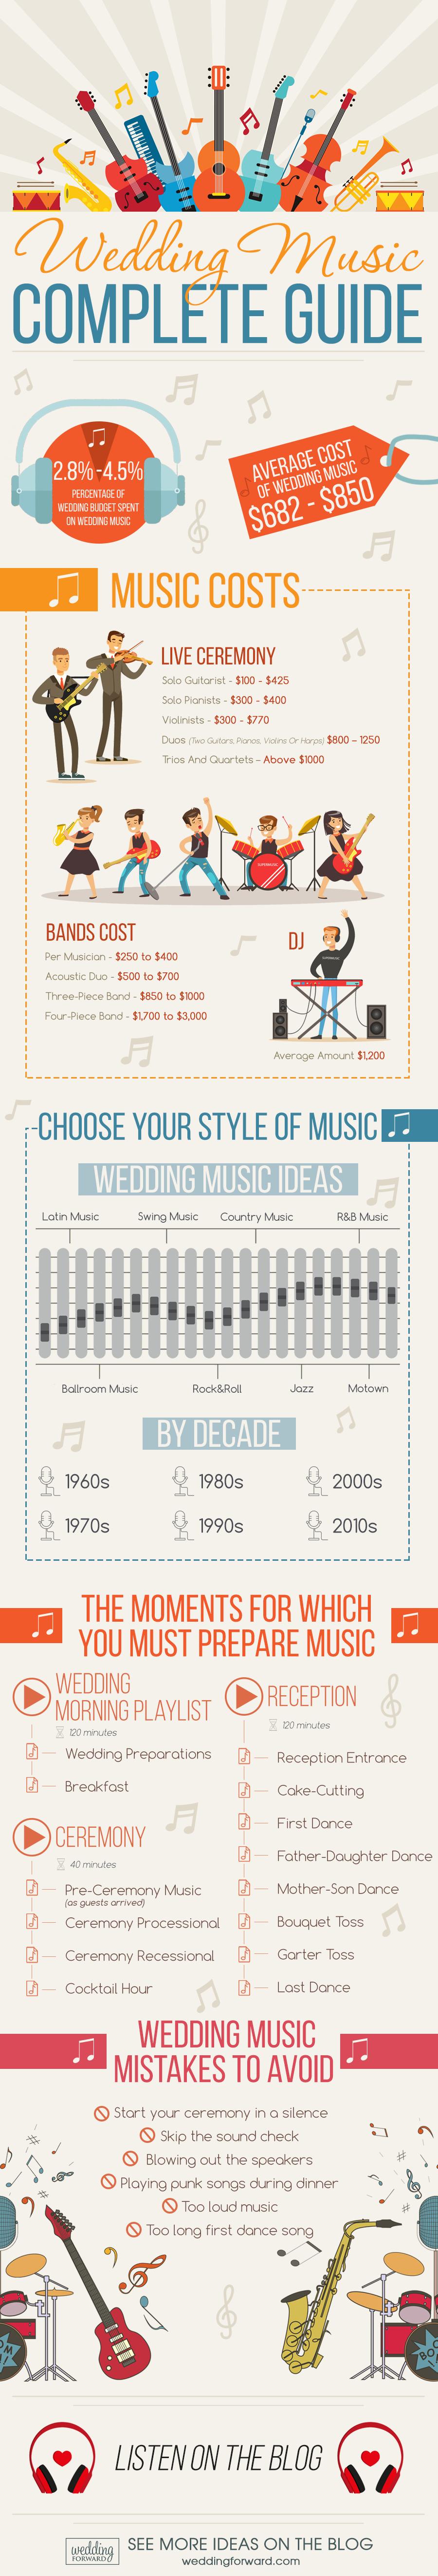 wedding songs music guide infographic